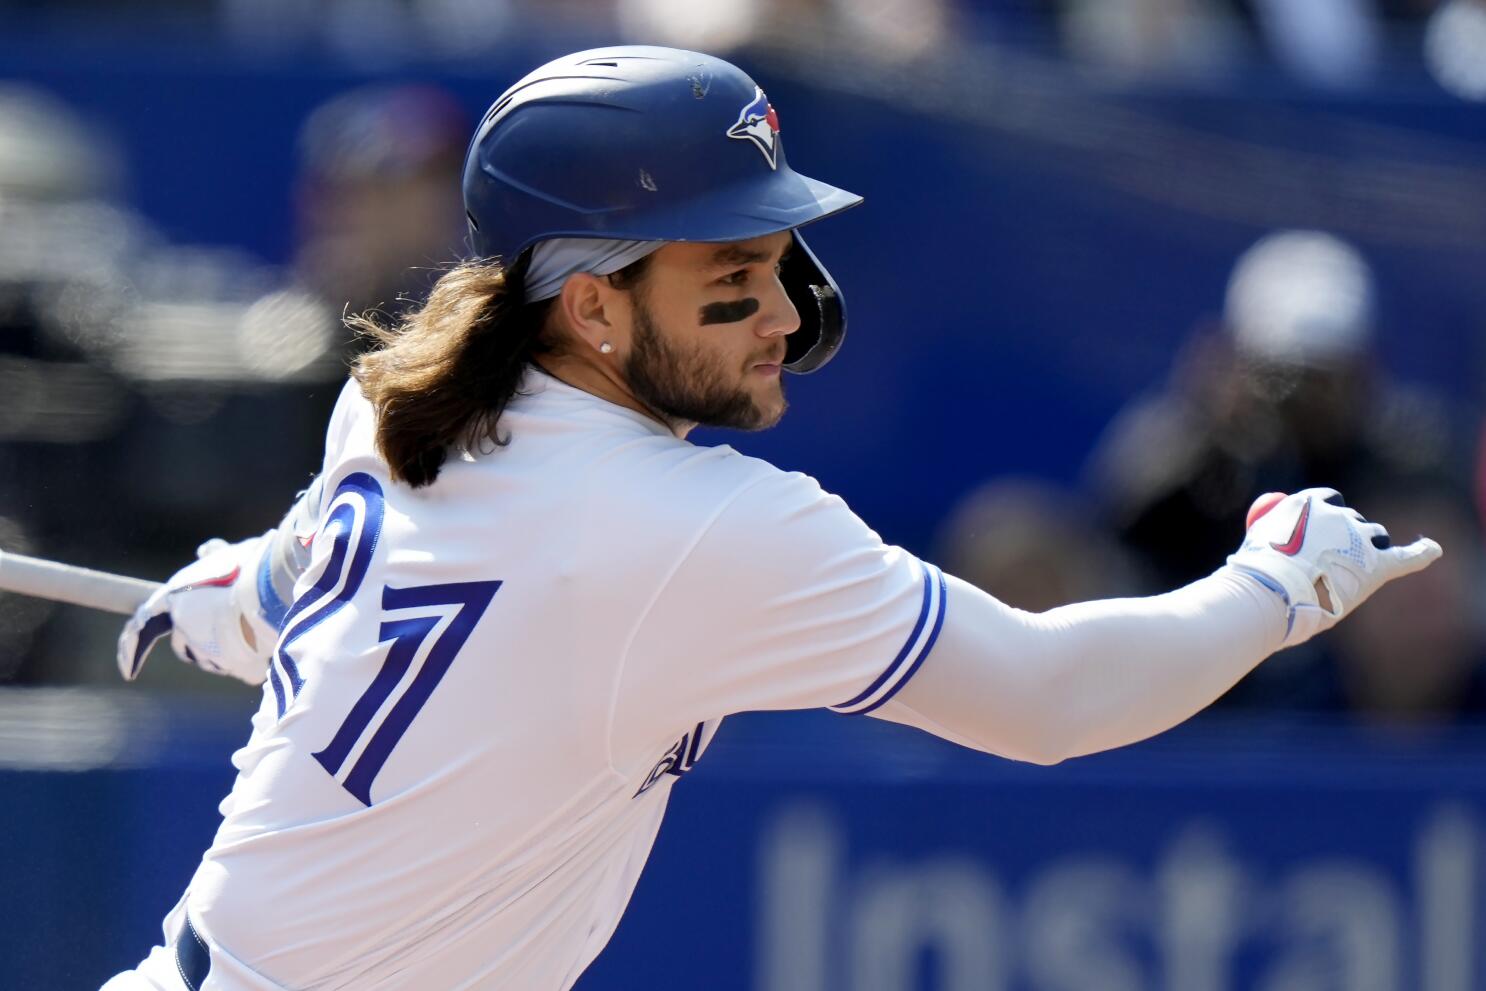 Bo Bichette, Blue Jays finalize $33.6M, 3-year contract - The San